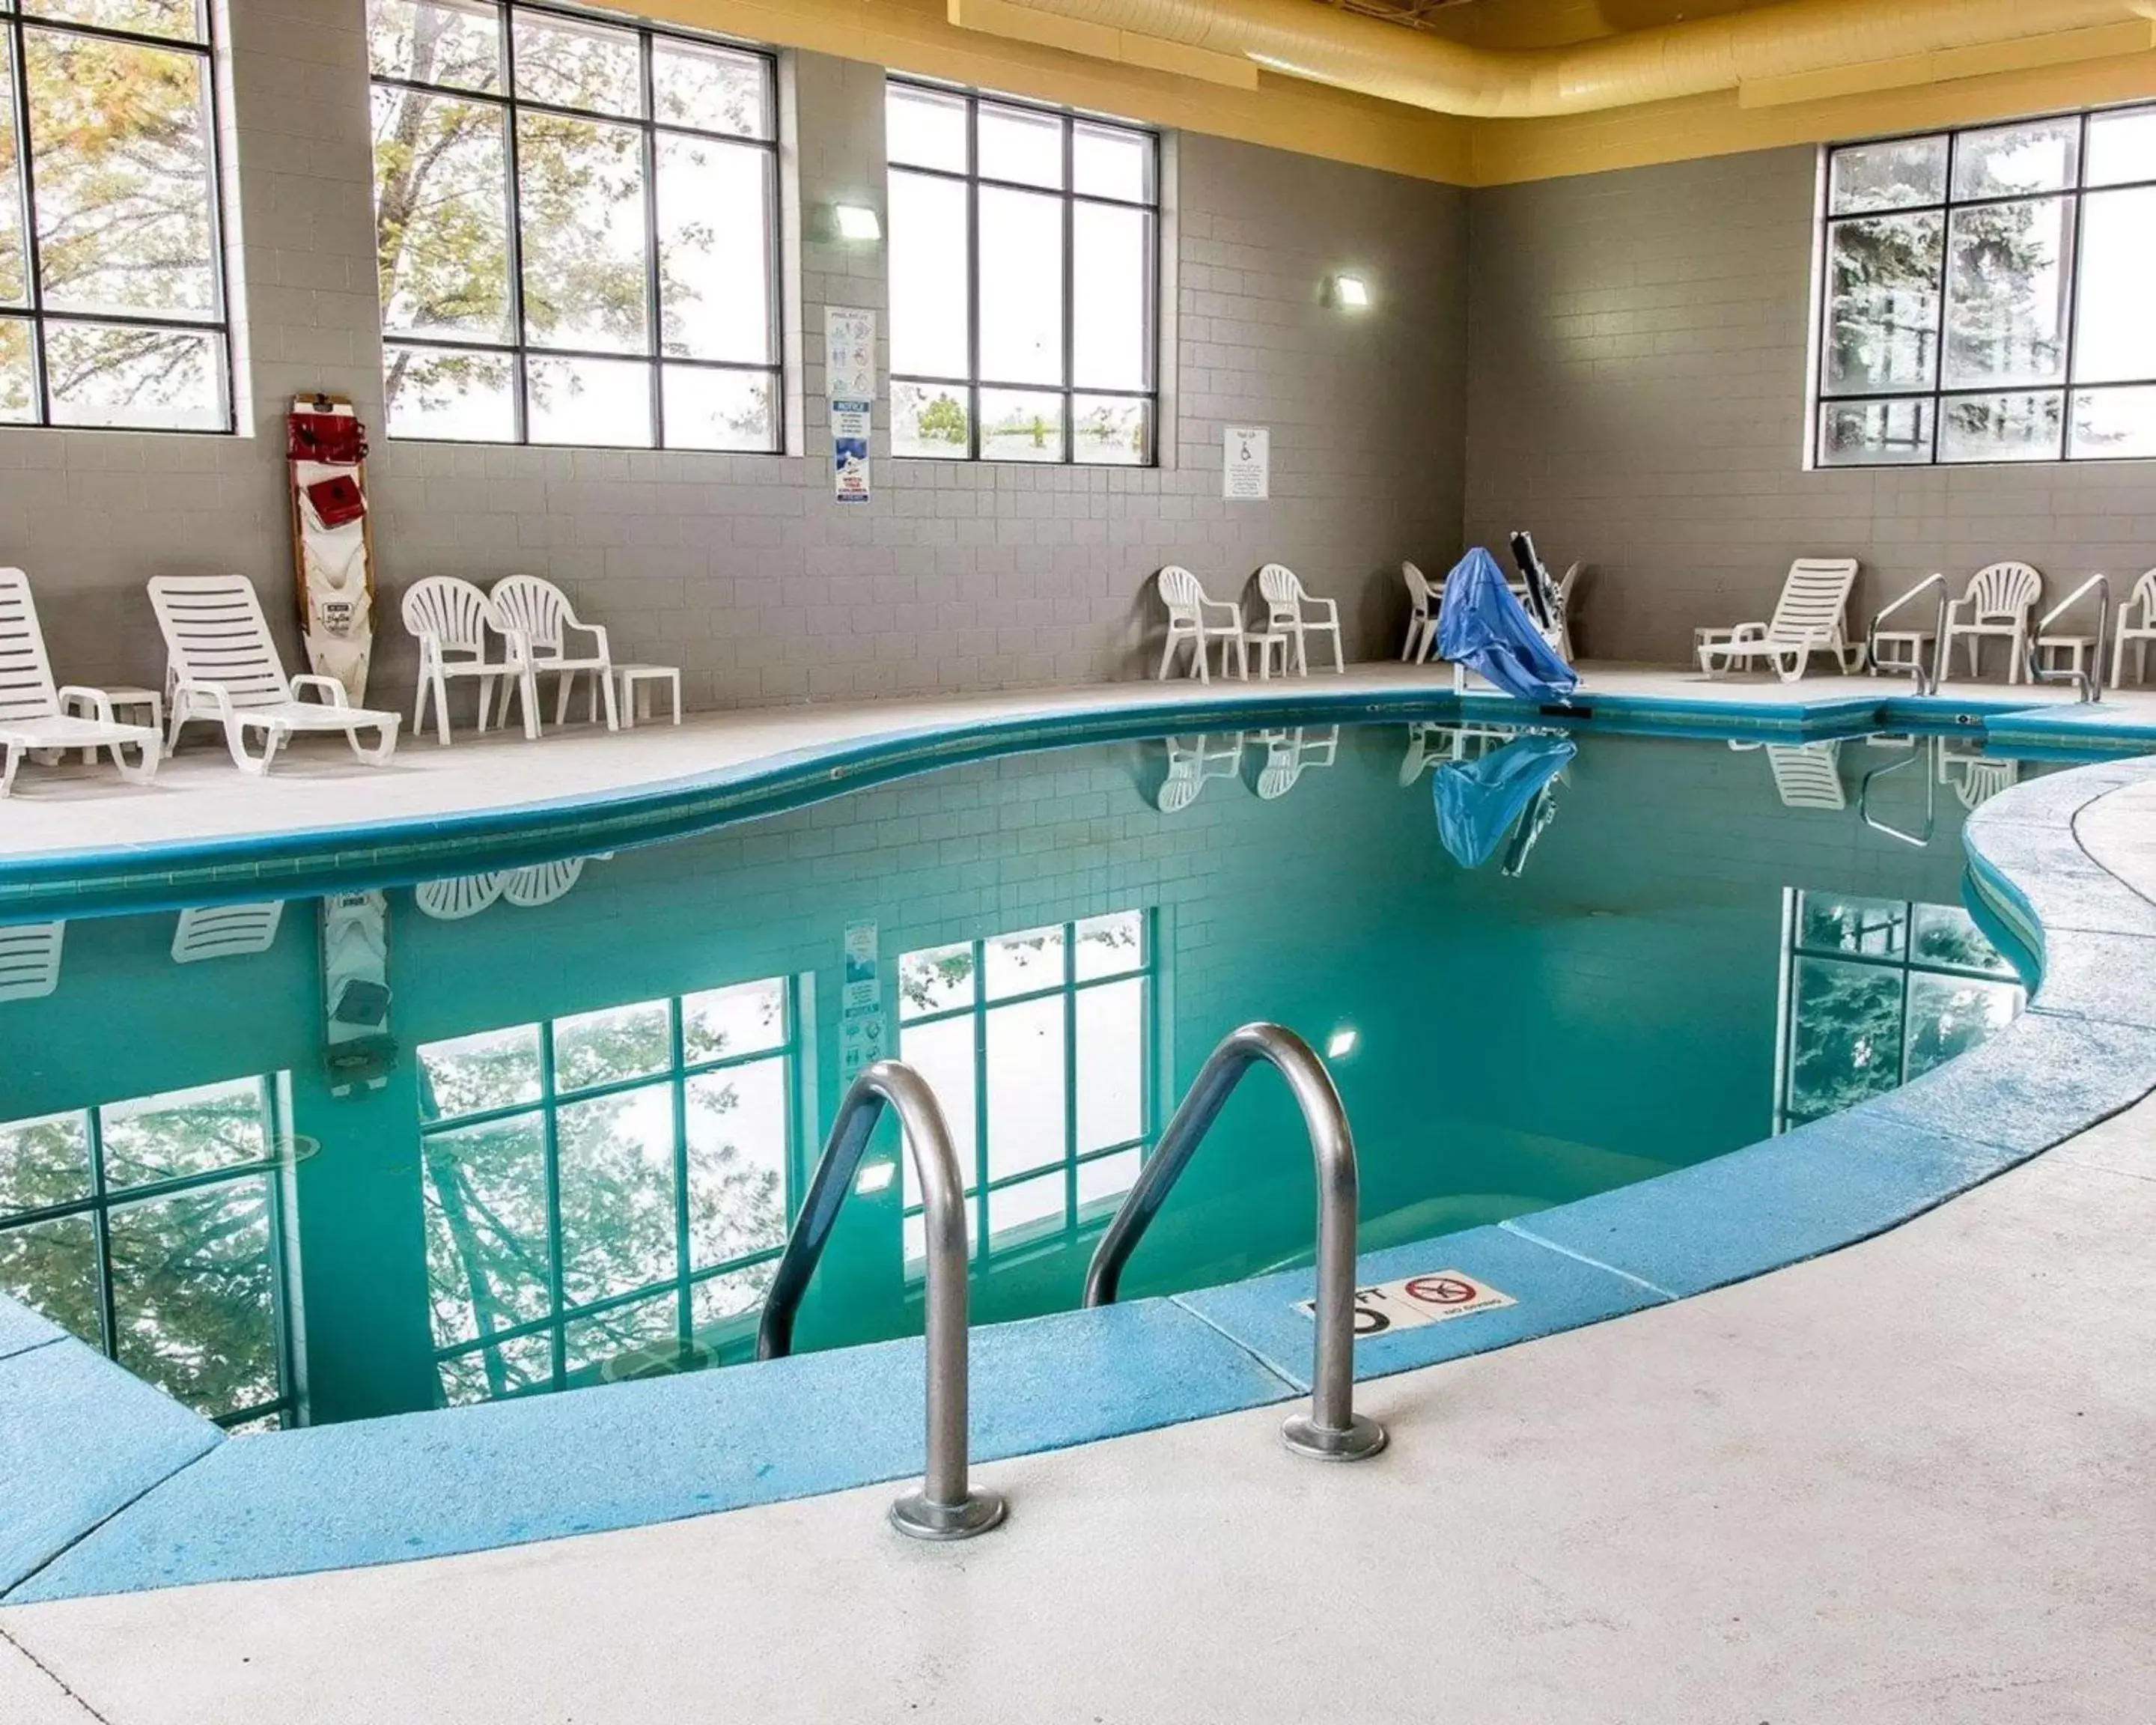 On site, Swimming Pool in Clarion Inn I-94 near Expo Center